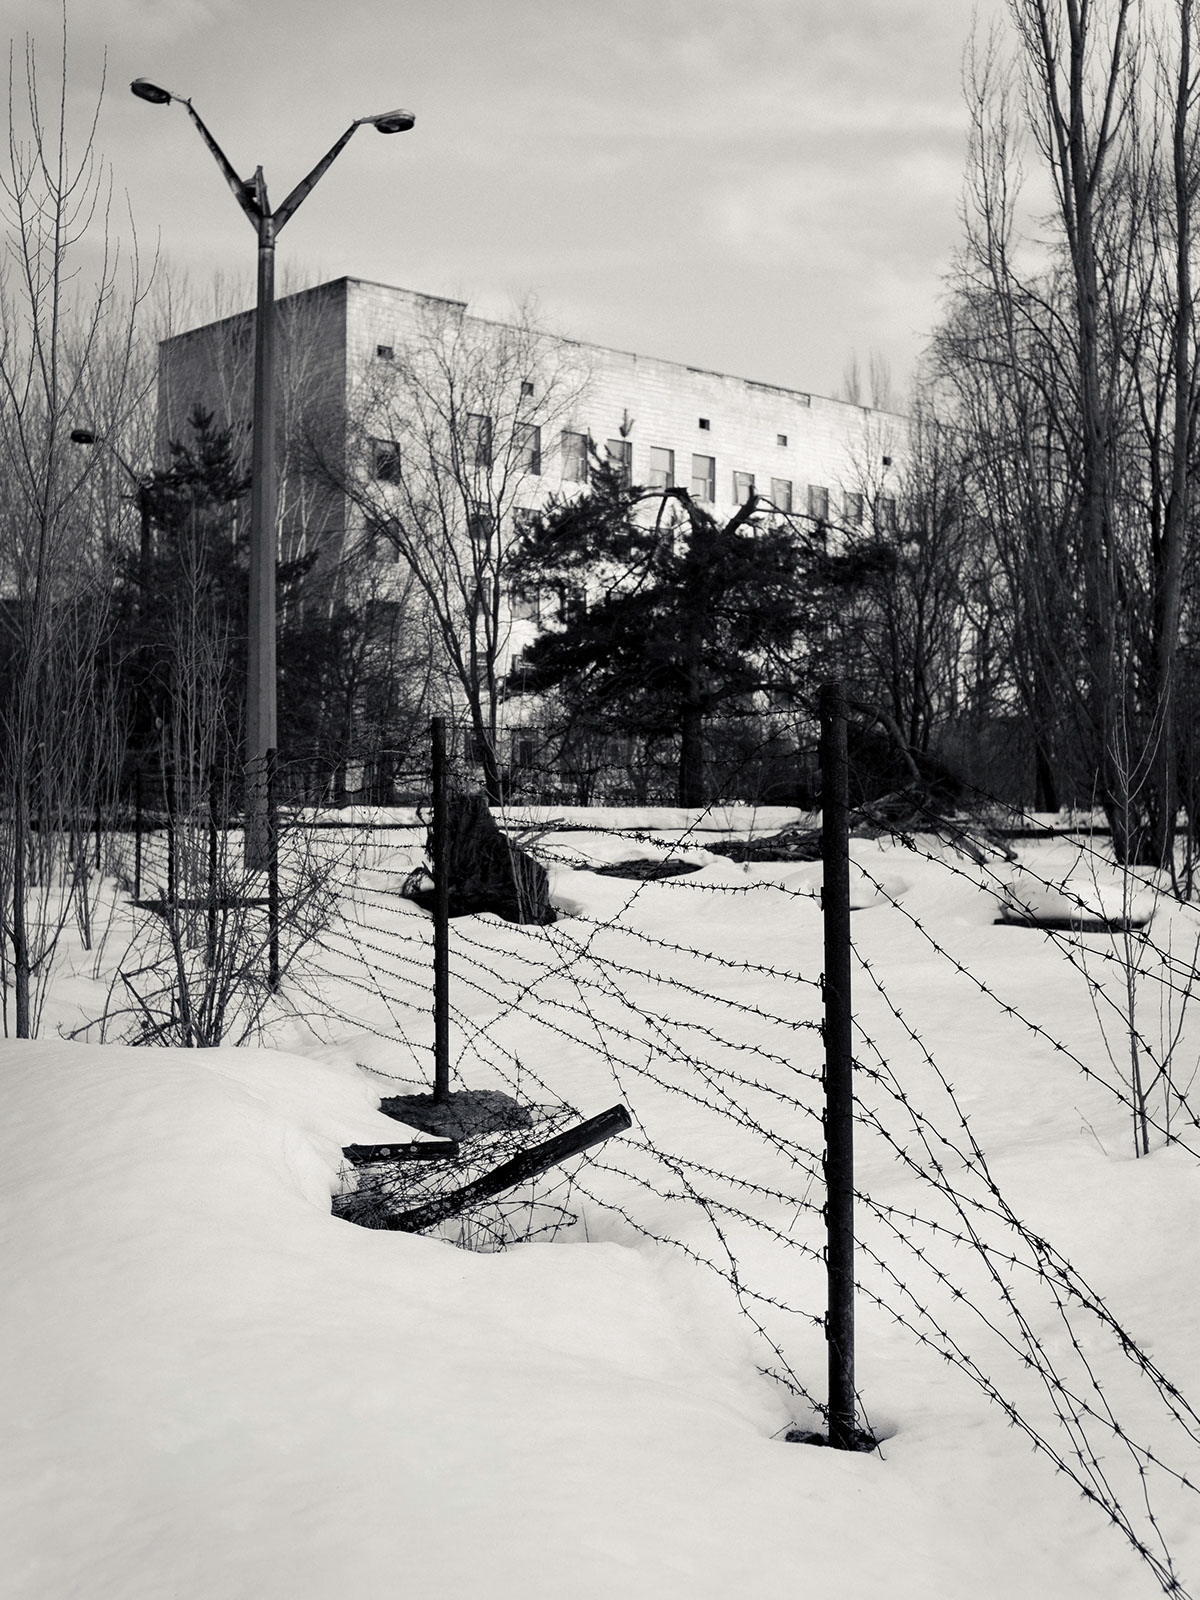 chernobyl pripyat nuclear Leica monochrom disaster accident m9 Summicron 35mm F2